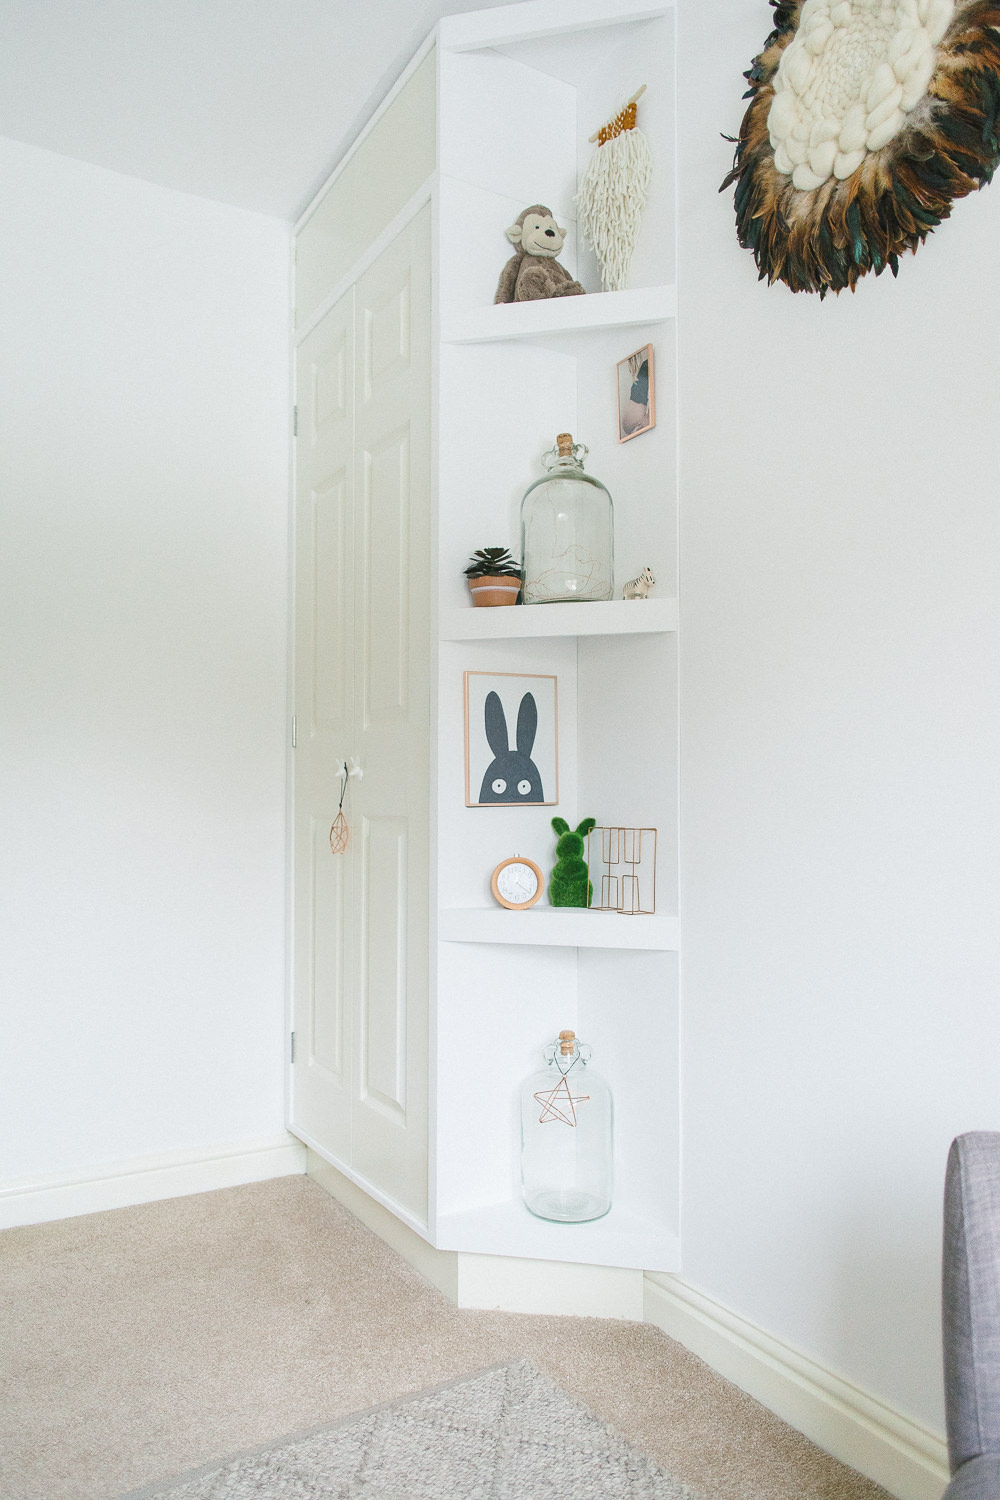 Shelf styling with wooden and natural accessories